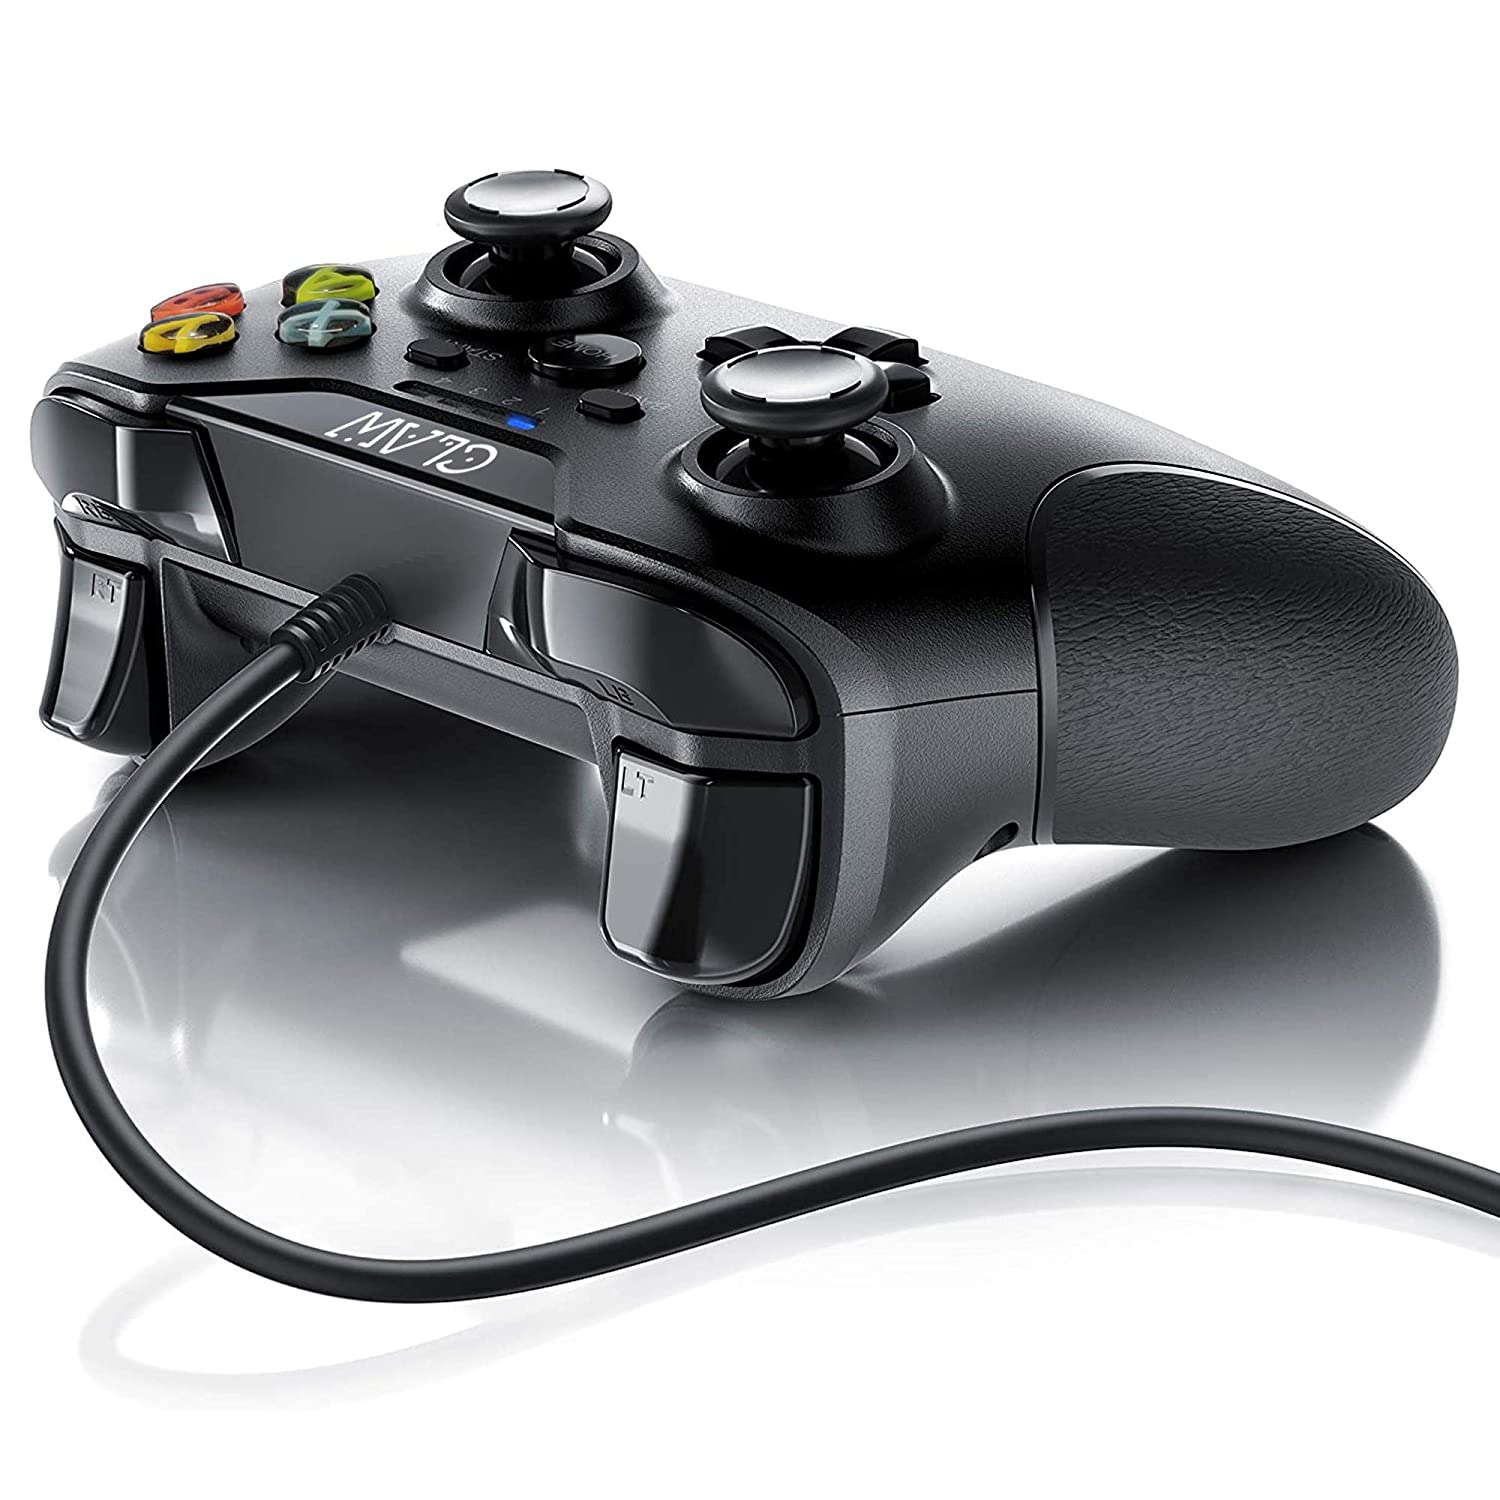 CLAW Shoot Wired Gamepad for PC only (Use Code Origin5 to Get 5% DIscount)